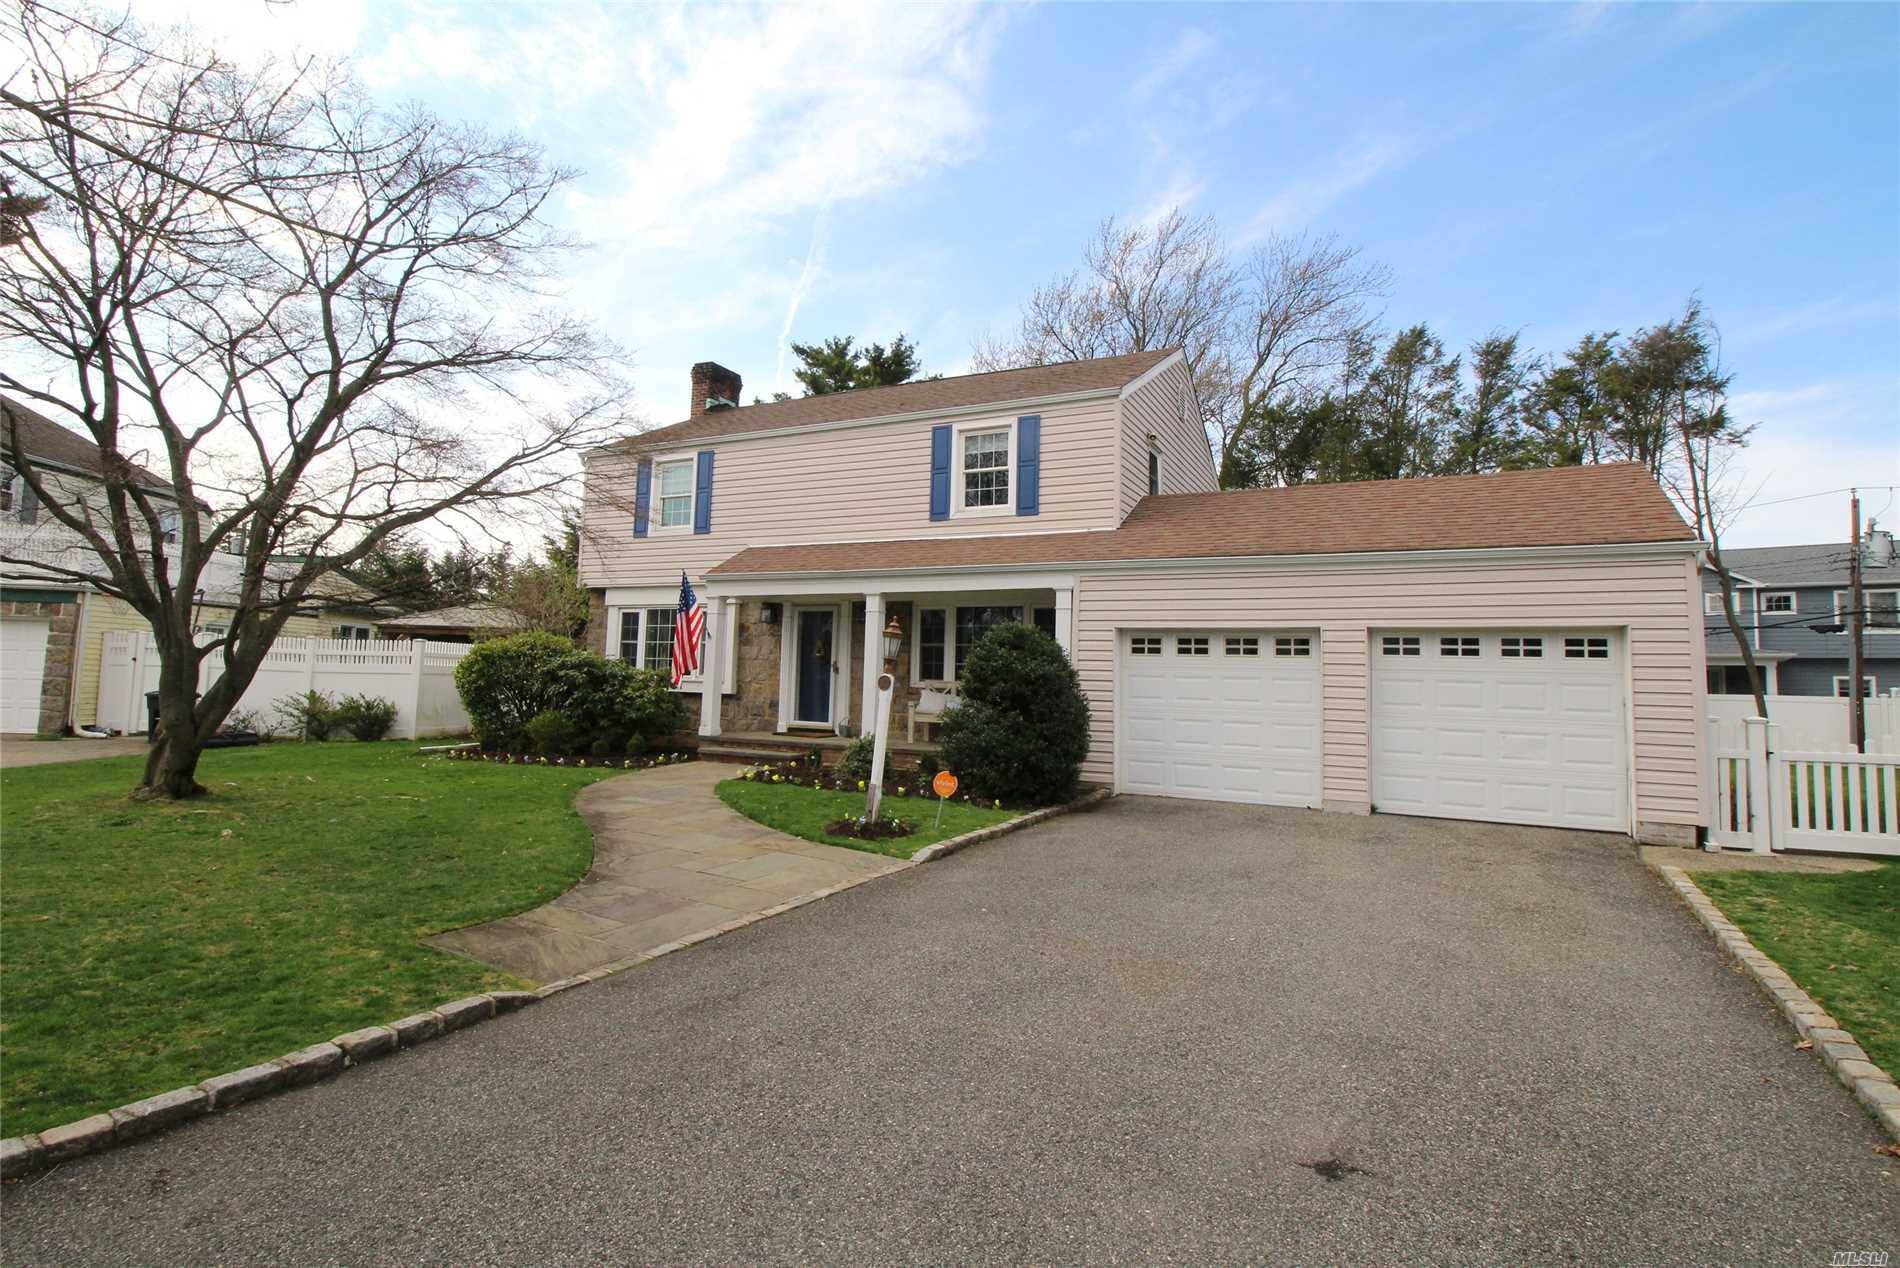 Super Clean and Beautiful Center Hall Colonial, Located On a Tree lined Block In The Birchwood Section.